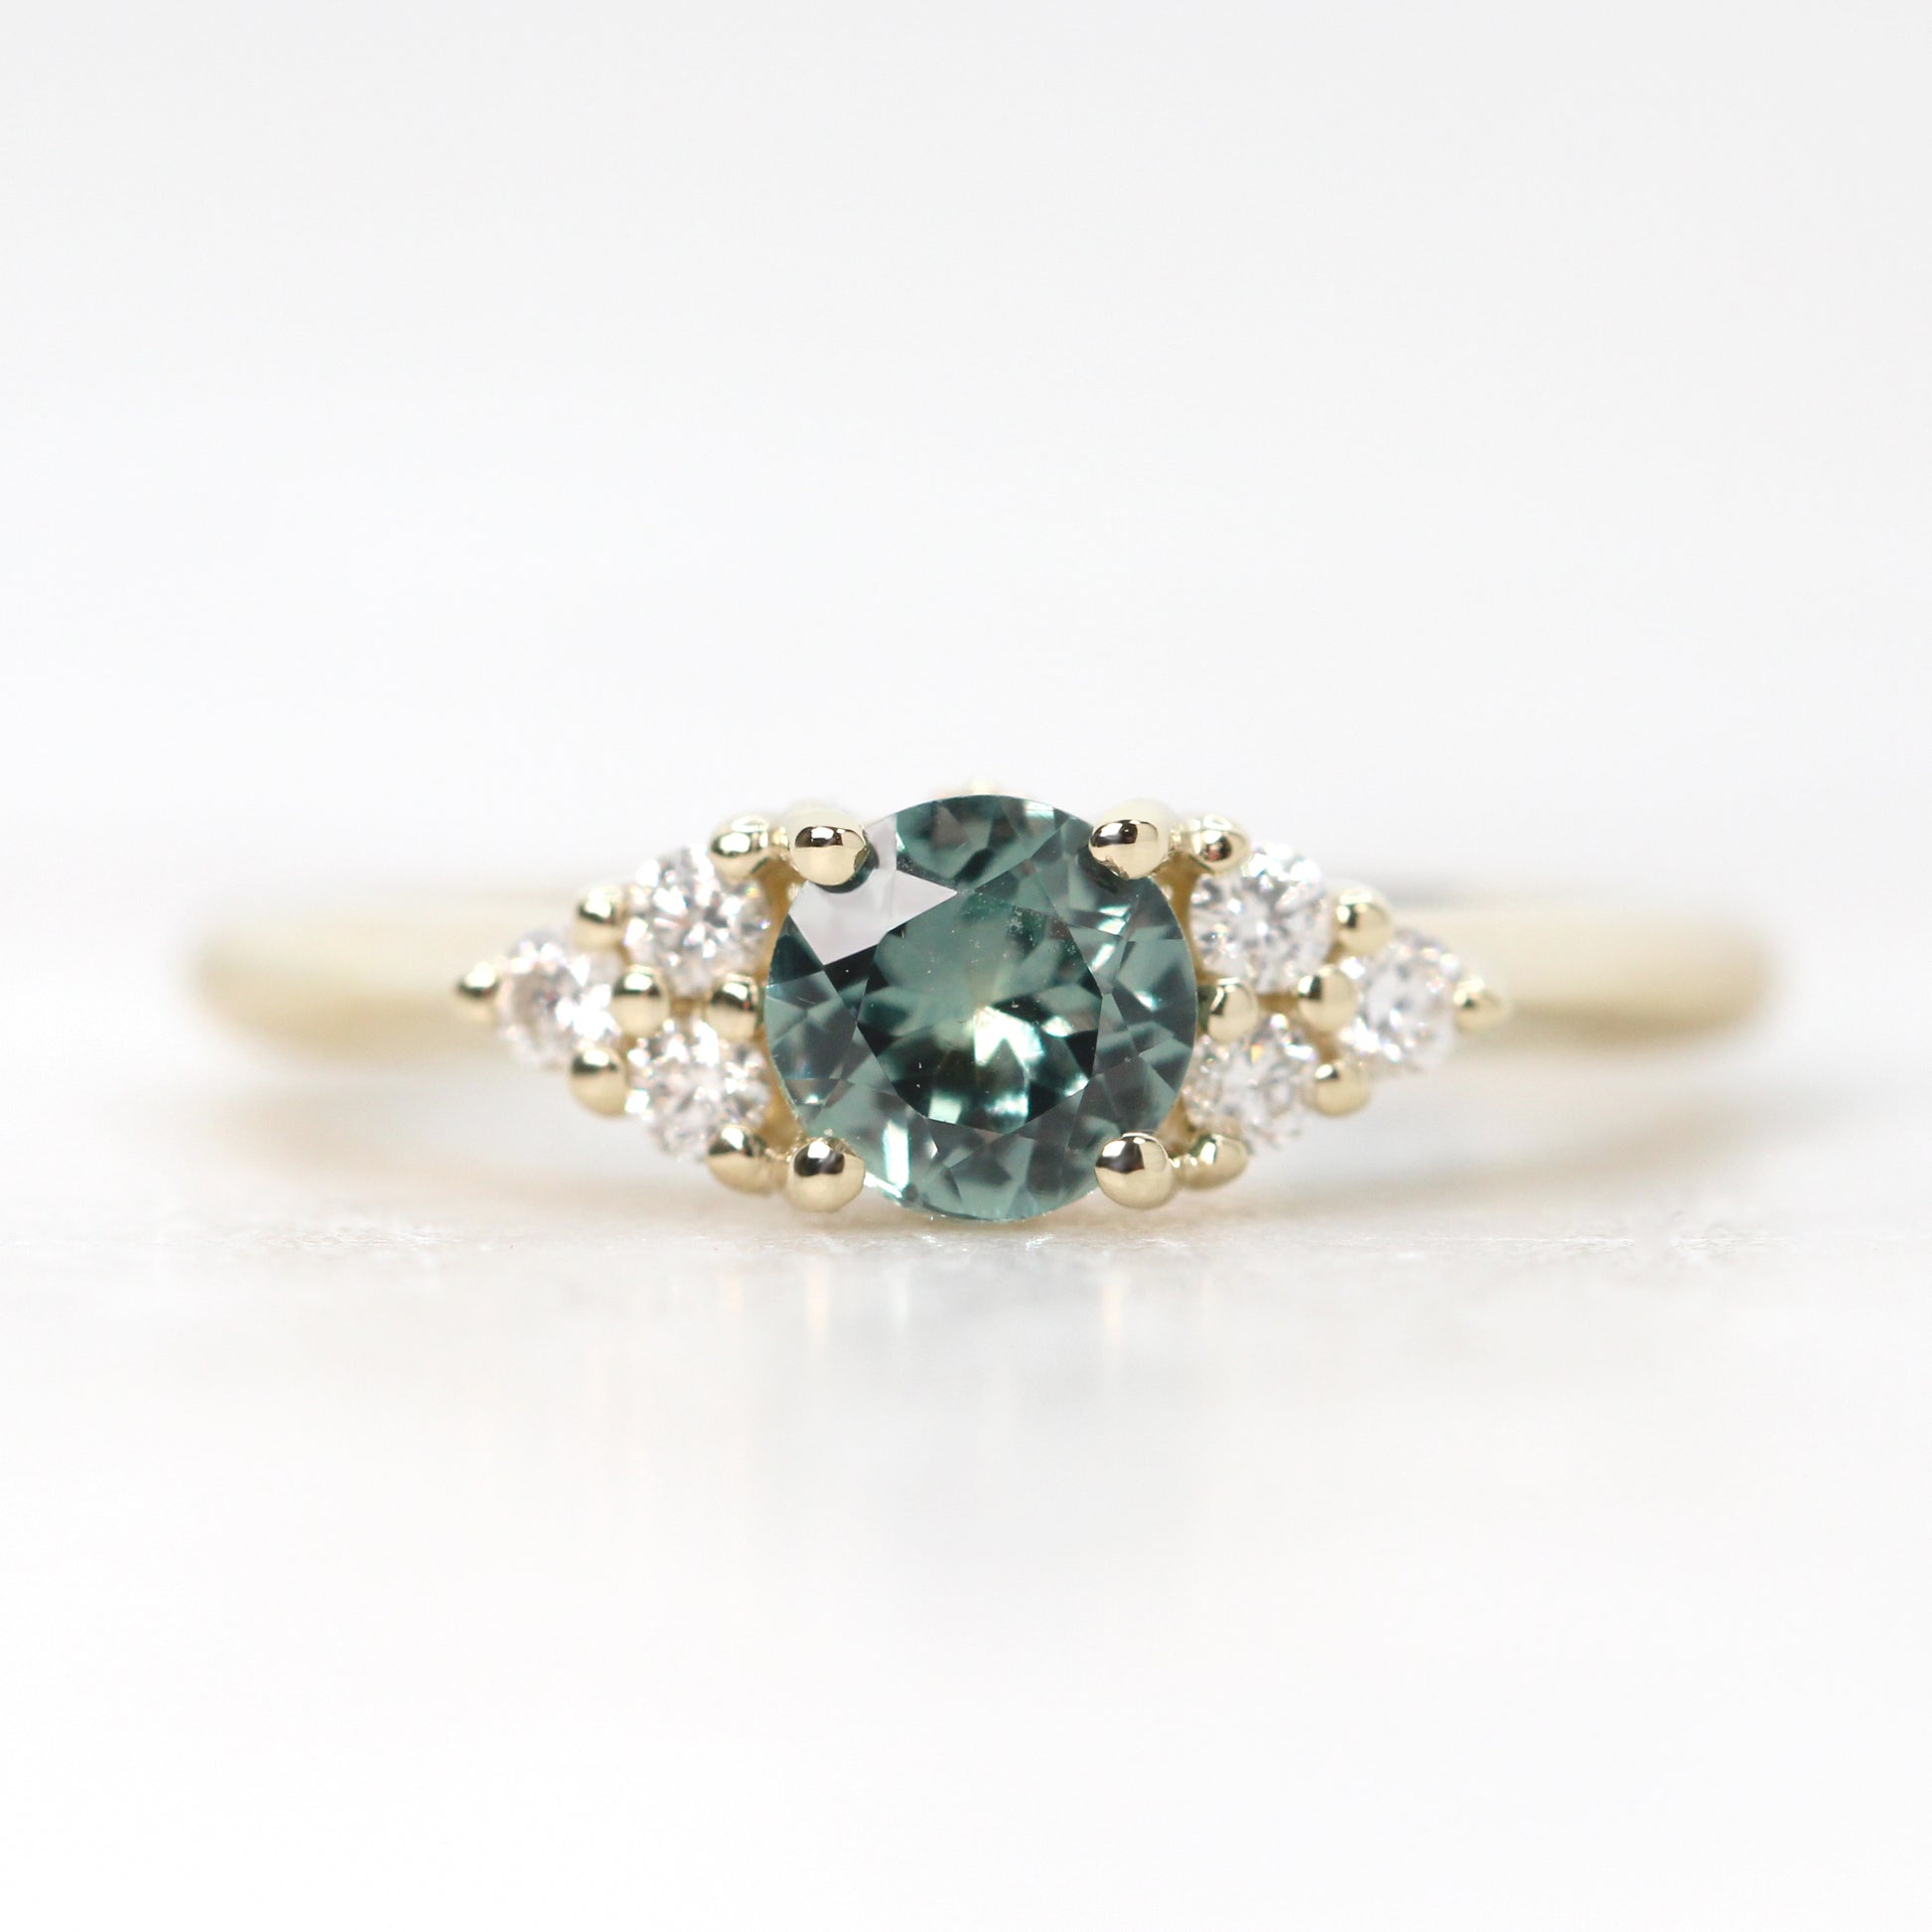 The Aster Ring with a Pear-Cut White Diamond